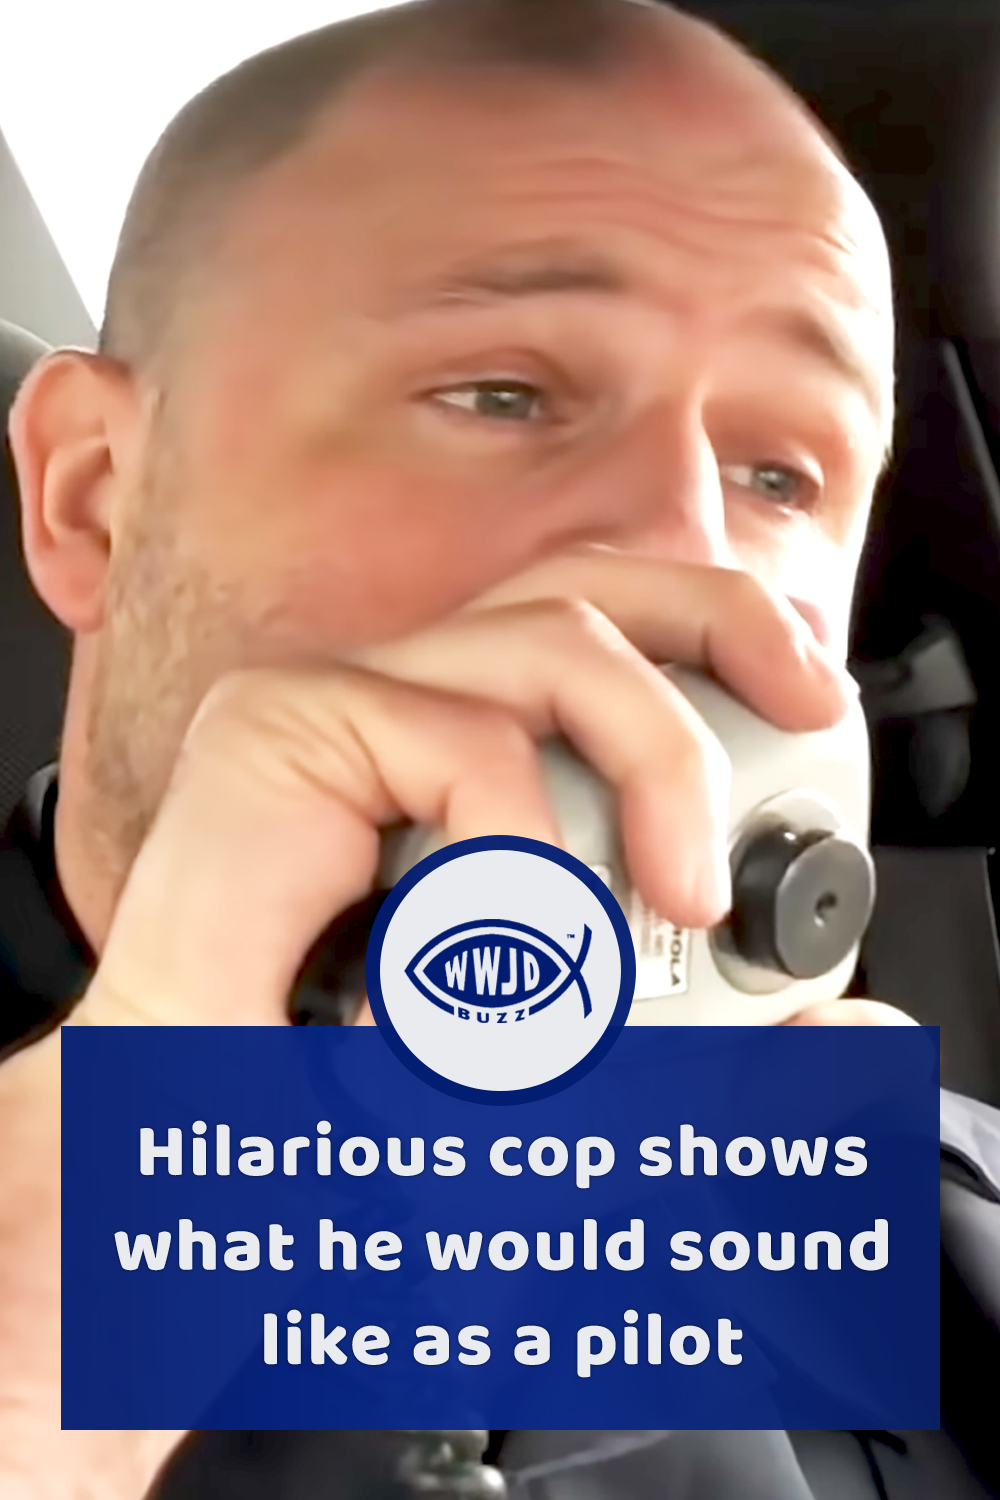 Hilarious cop shows what he would sound like as a pilot